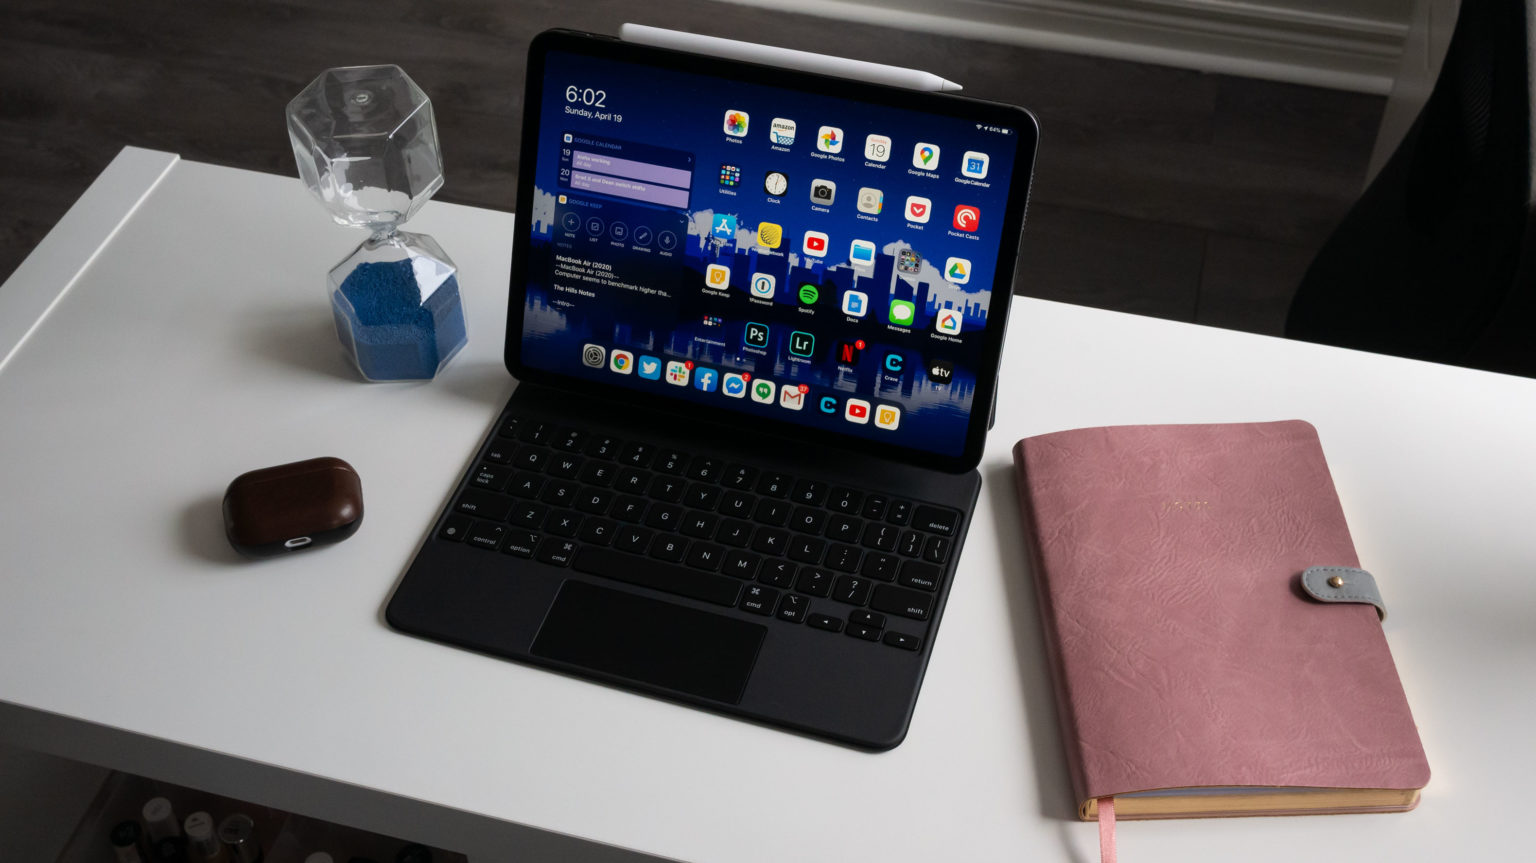 Apple’s Magic Keyboard makes the iPad Pro a viable laptop replacement